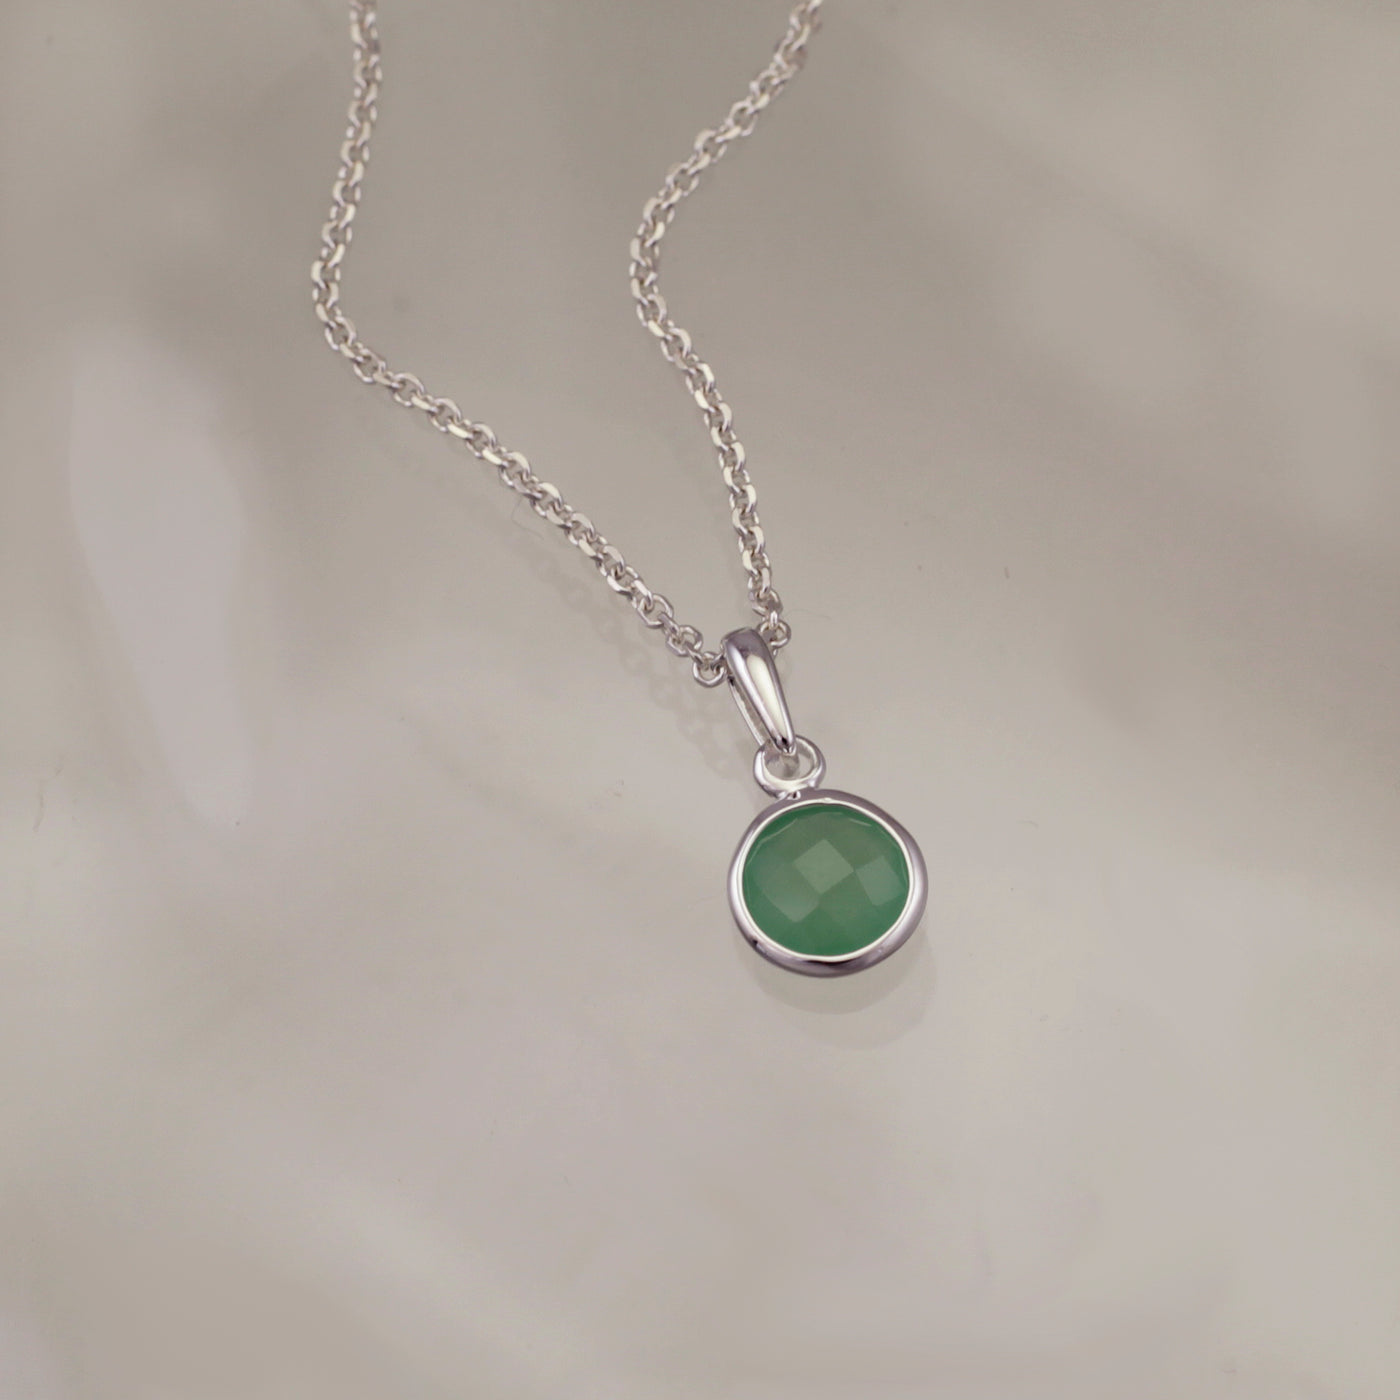 Image of Silver and Green Quartz Pendant Necklace